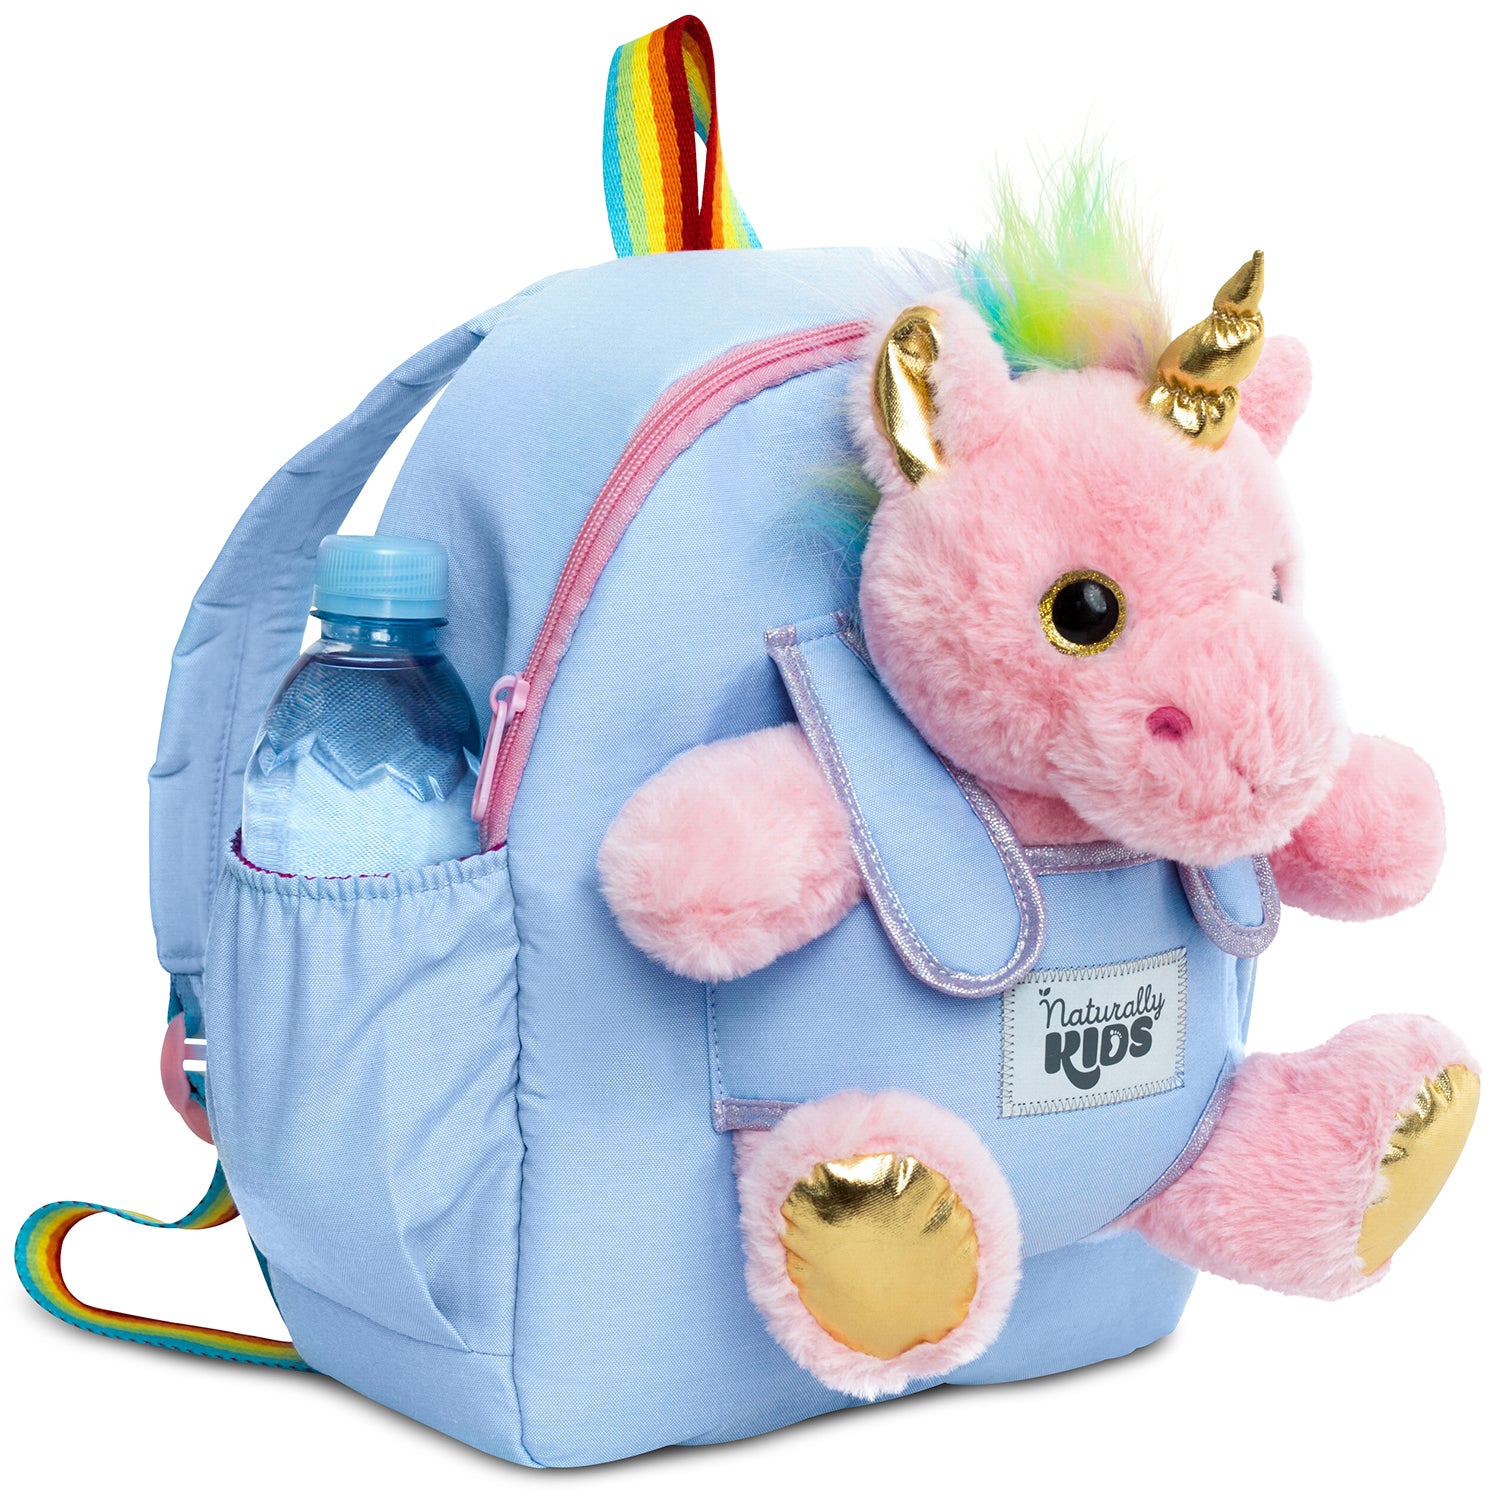 Naturally Kids Small Unicorn Backpack for Girls Unicorn Toys for Girls - Unicorns Gifts for Girls Age 5- Unicorn Stuffed Animal for Girls - Unicorn